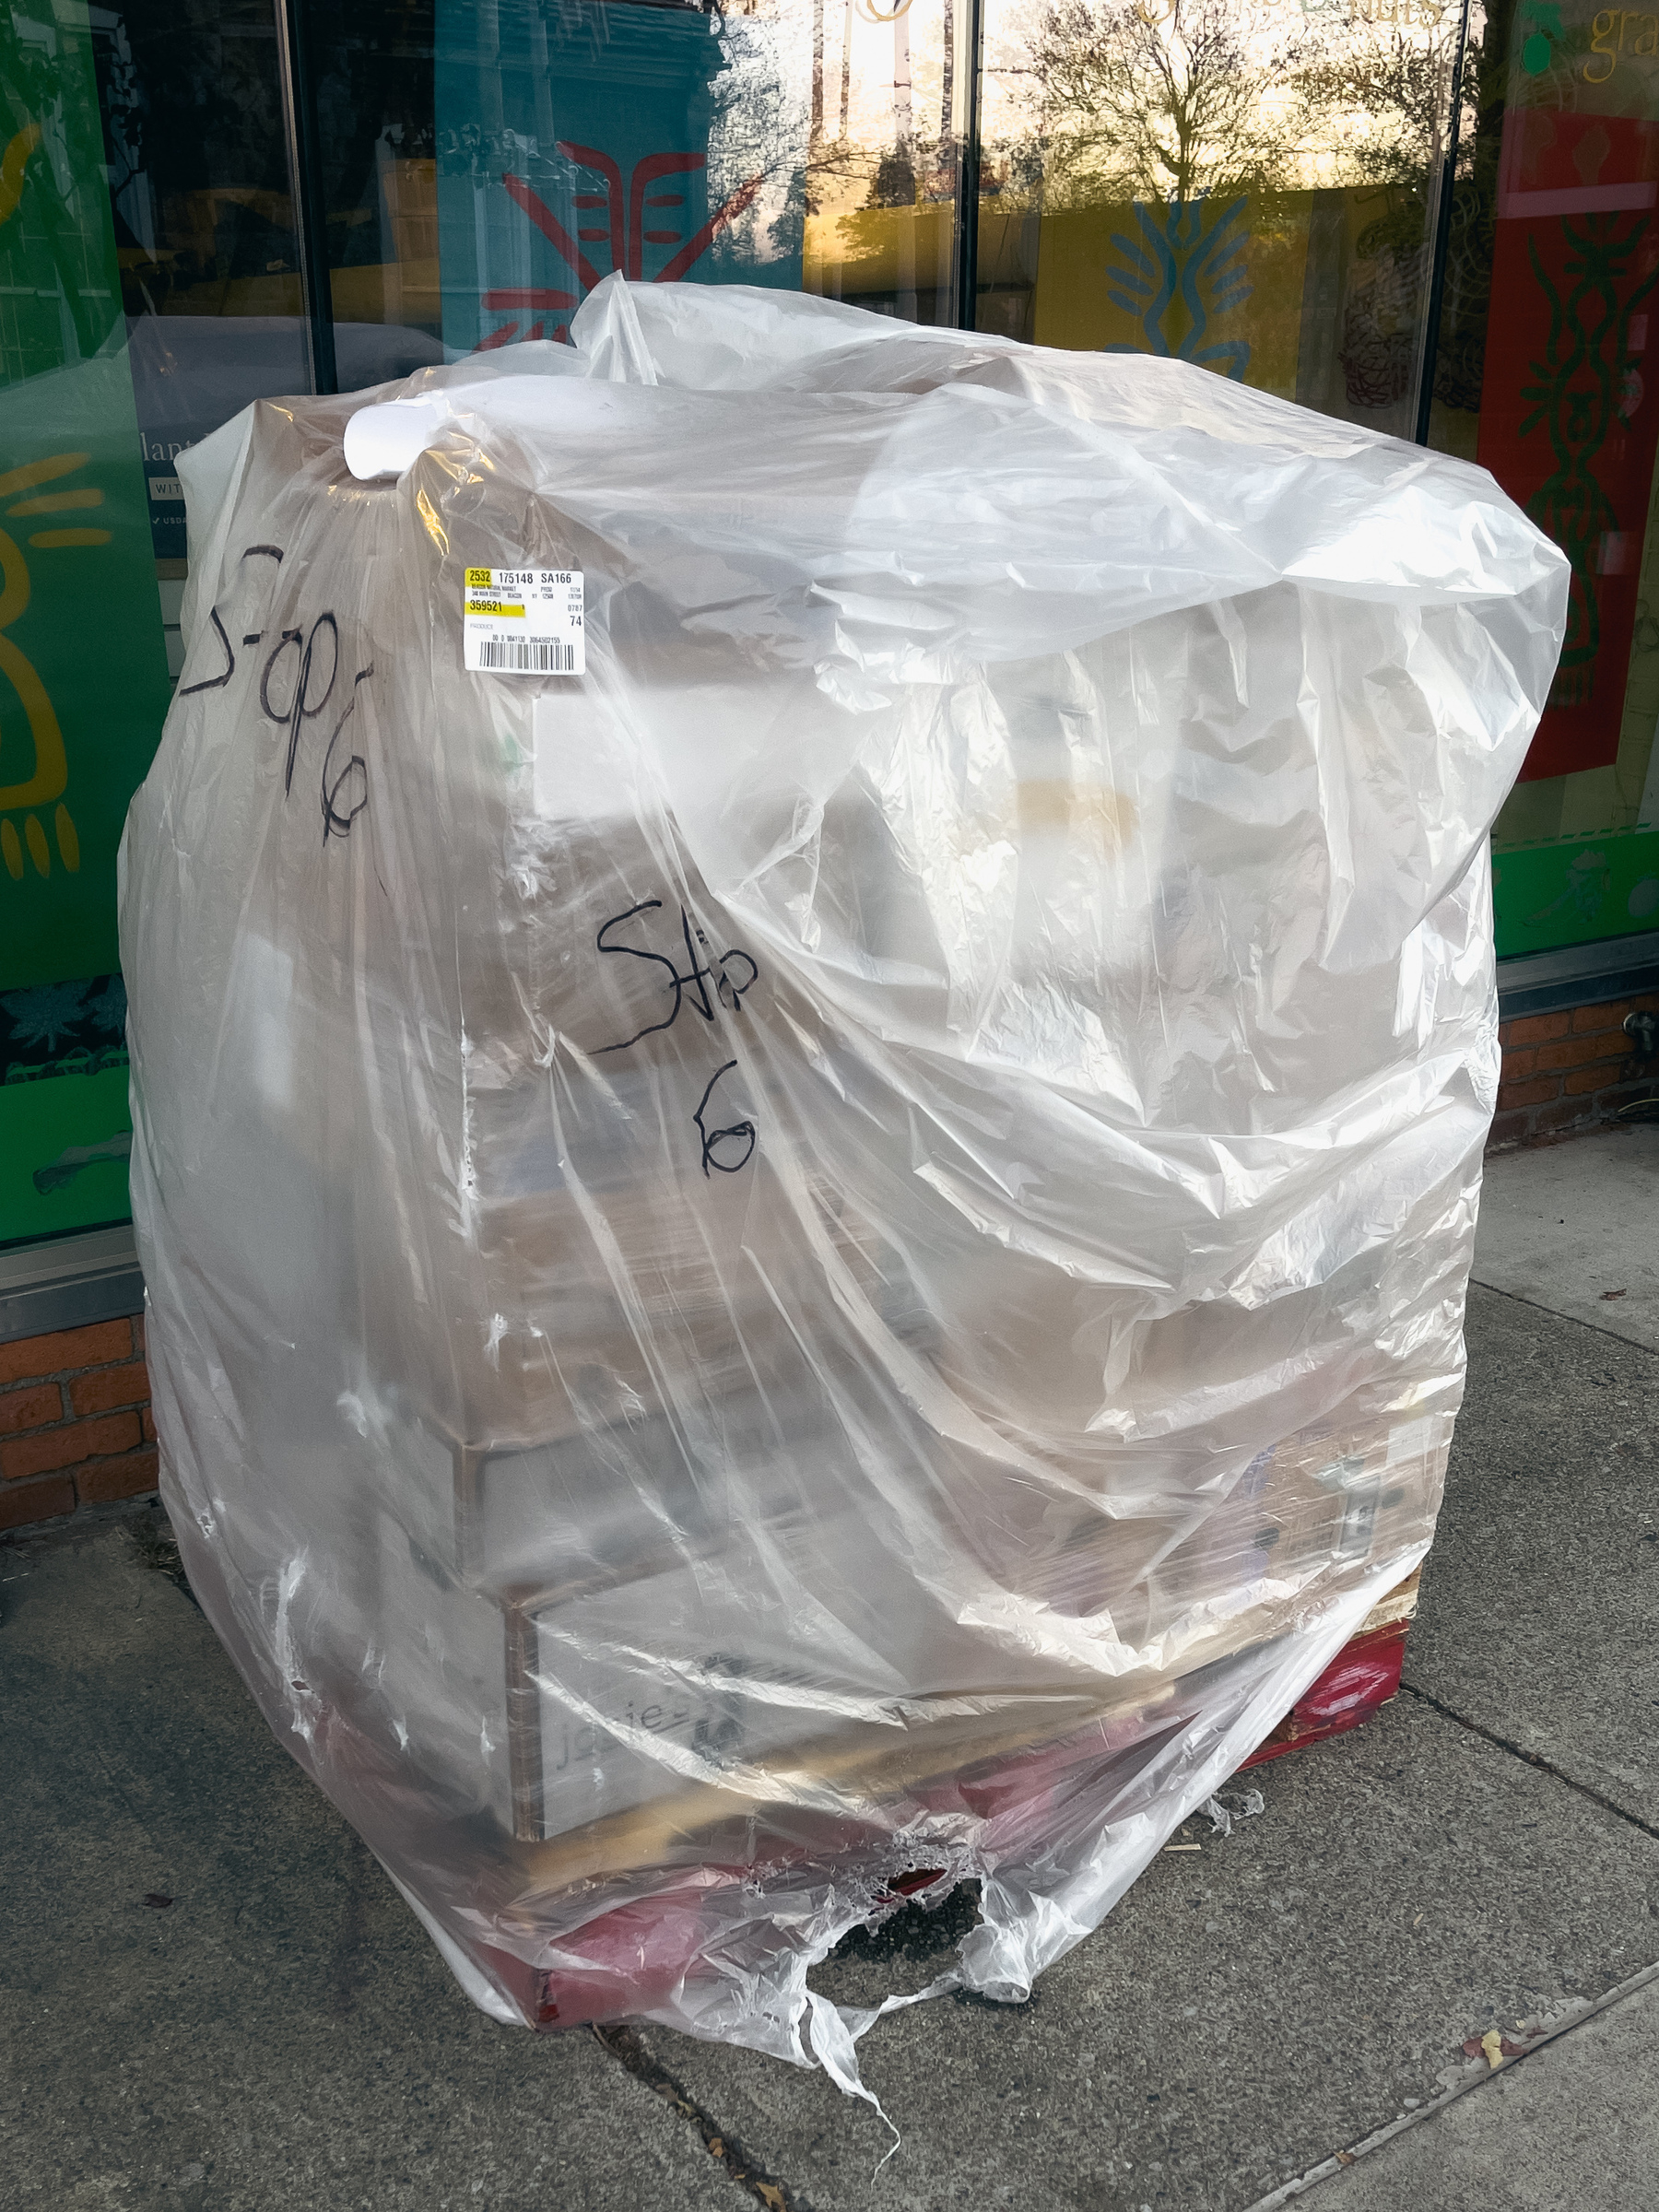 Palate of delivery boxes wrapped in plastic outside a store.